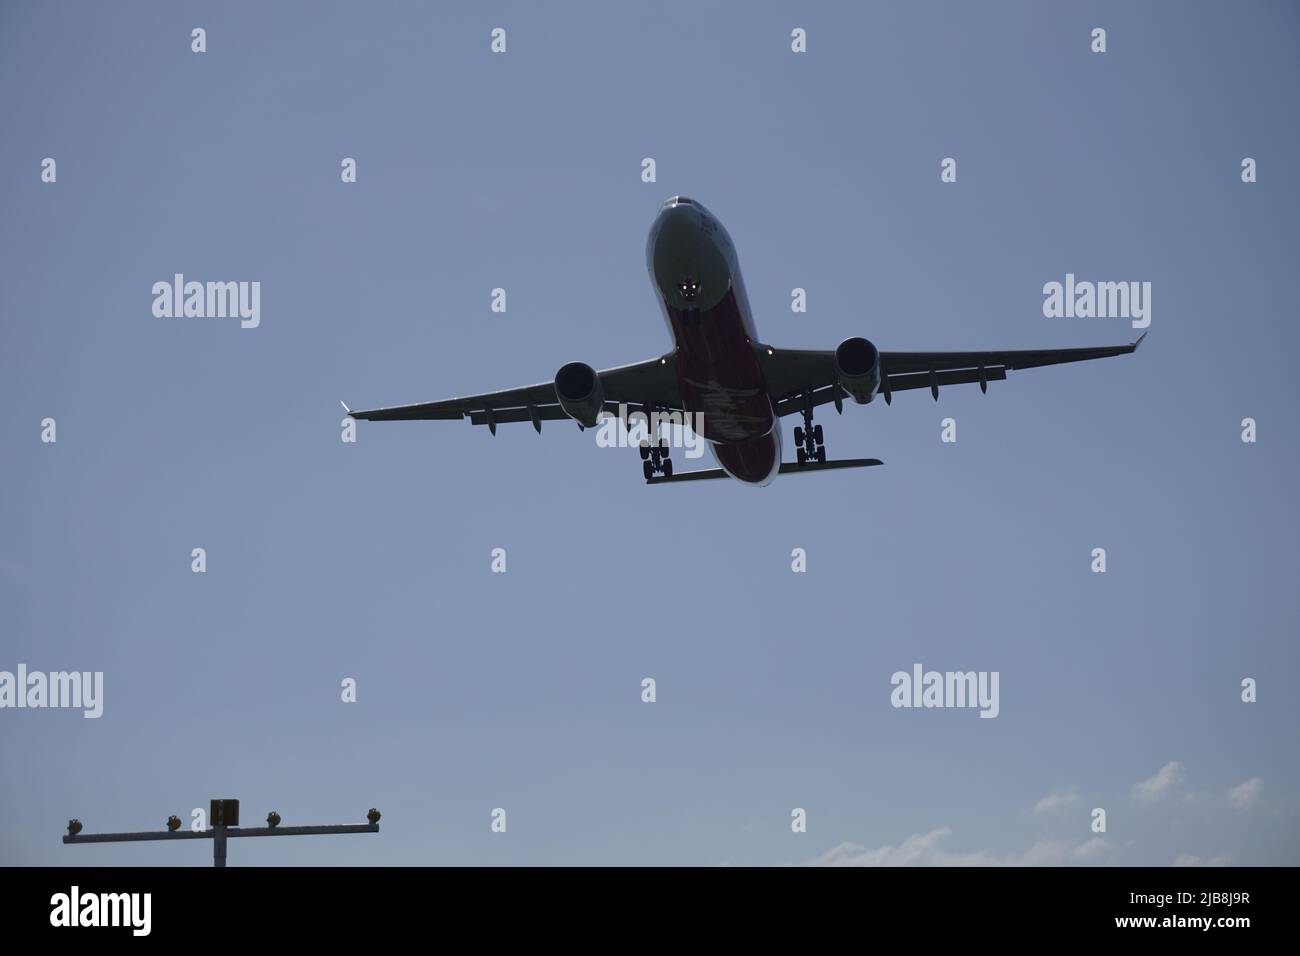 silhouette of airplane approaching runway Stock Photo